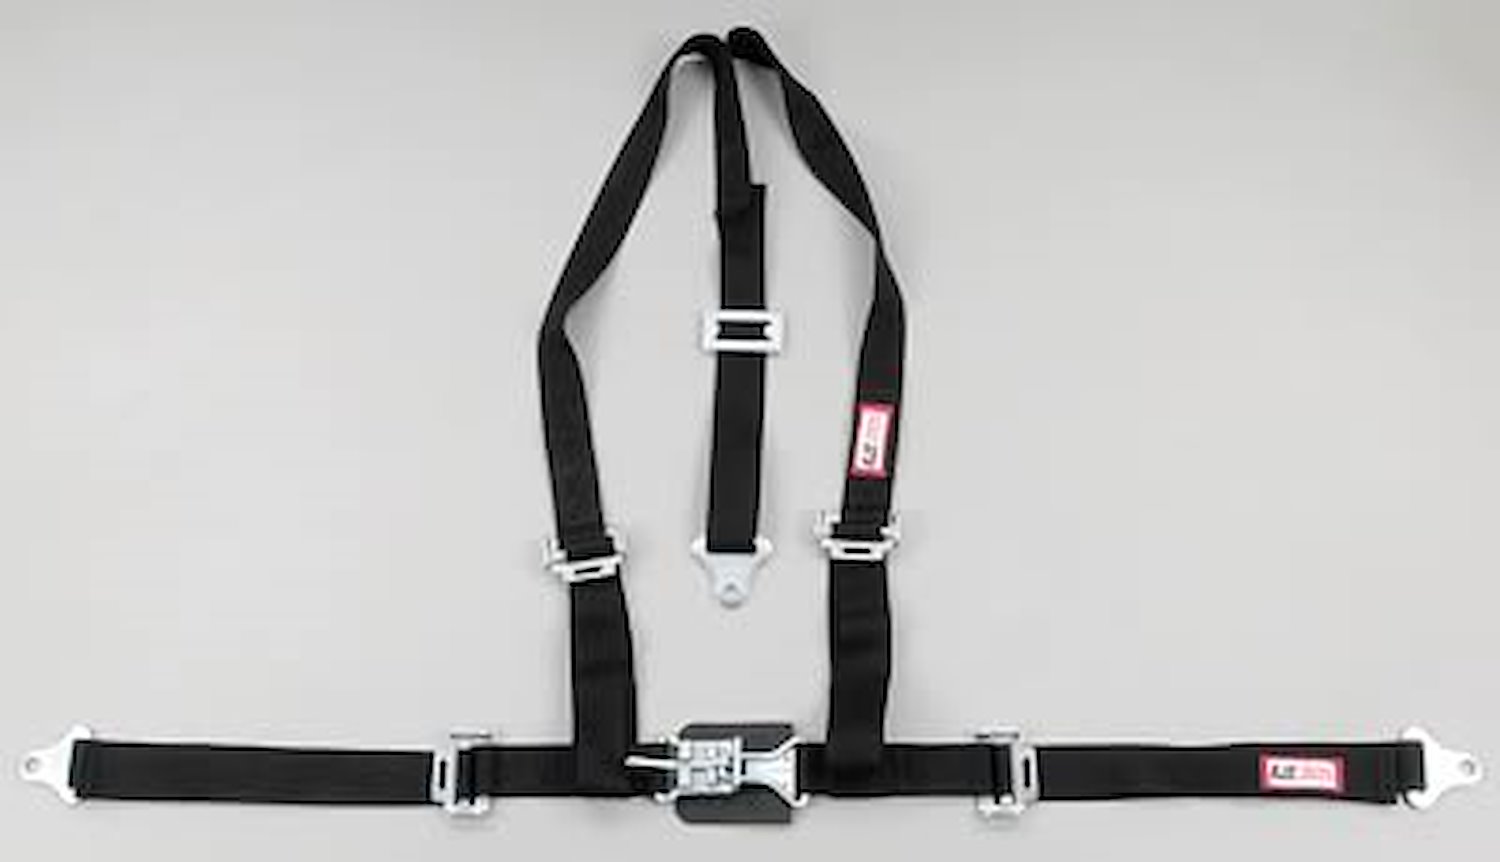 NON-SFI L&L HARNESS 3 PULL UP Lap Belt SNAP SEWN IN 2 S.H. Individual FLOOR Mount WRAP/BOLT BLUE